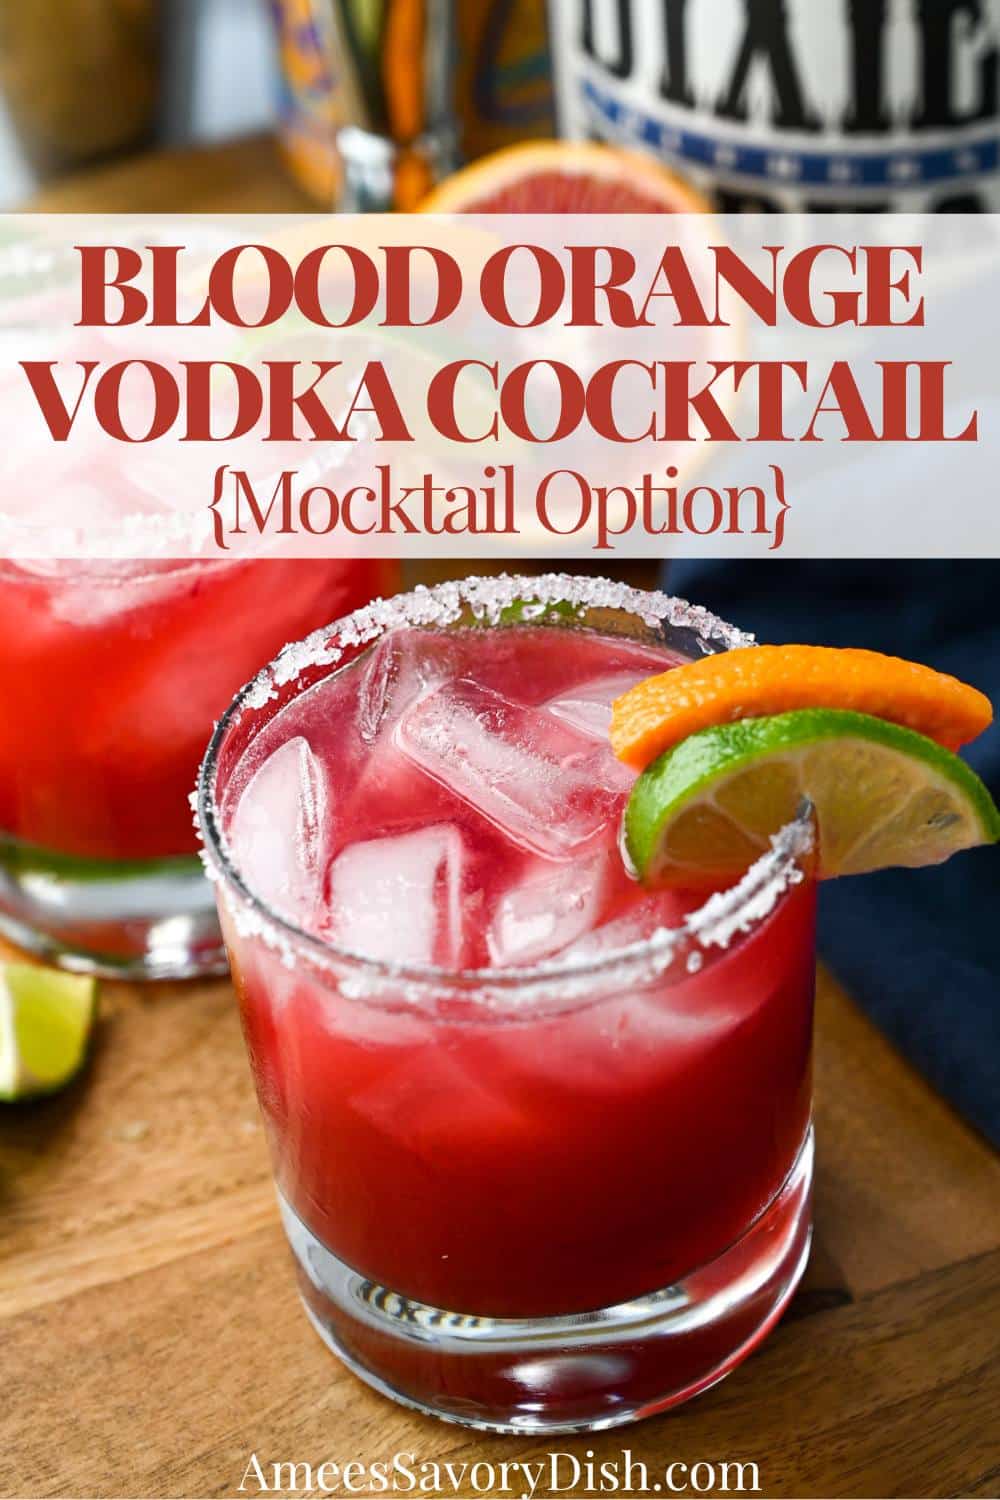 This blood orange vodka cocktail is a refreshing, low-calorie cocktail made with vodka, blood orange juice, lime juice, agave nectar, and a splash of sparkling water. via @Ameessavorydish